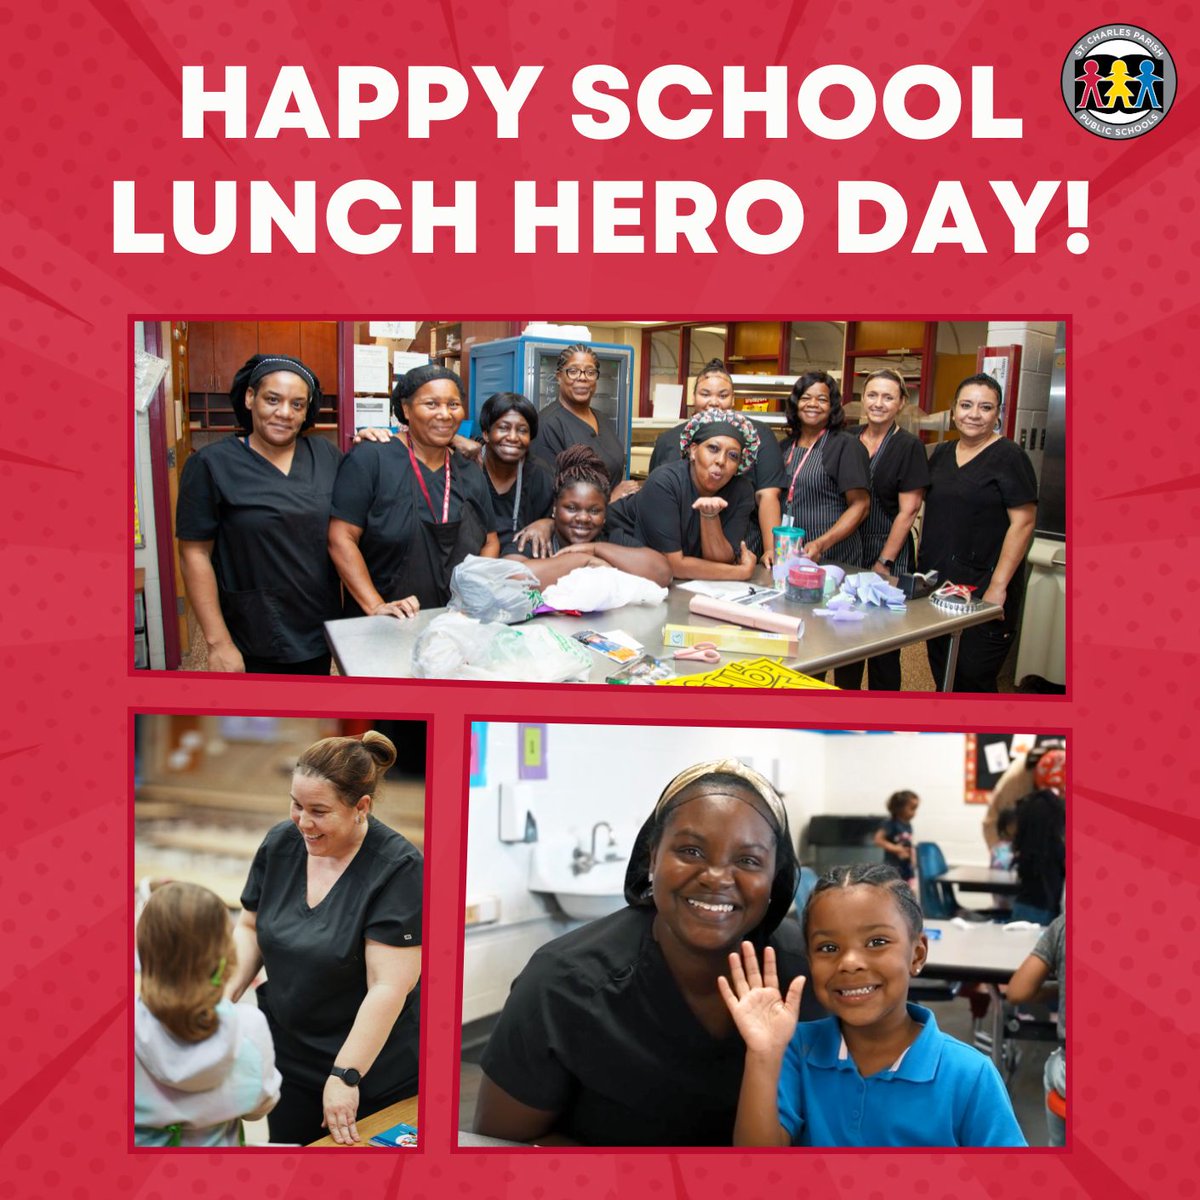 It's School Lunch Hero Day! 🎉🍎🥪 Today, we celebrate and thank all the amazing SCPPS child nutrition workers who work hard to ensure our students have access to healthy and delicious meals.

#ExpectExcellence
#YouandI 
#ALLIN